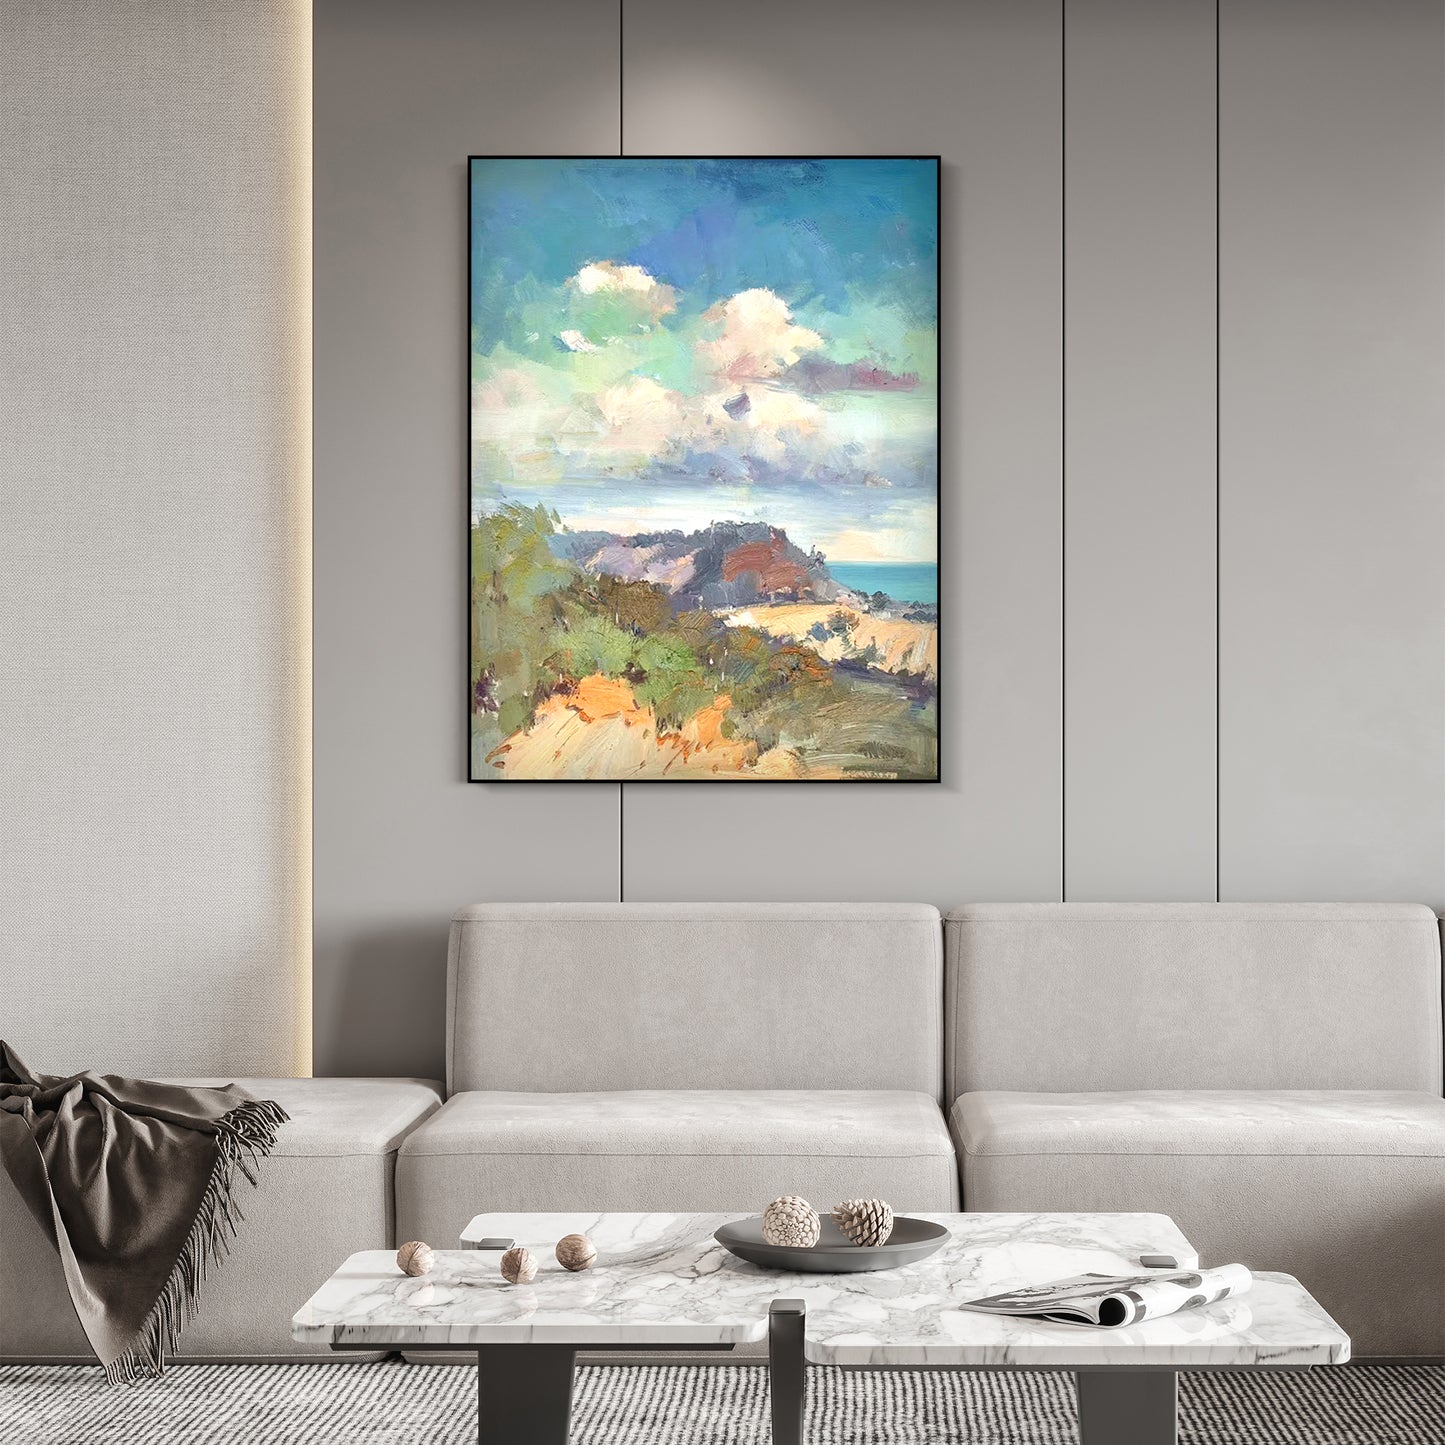 LANDSCAPE PAINTING, BEACH SCENERY, HAND-PAINTED CANVAS